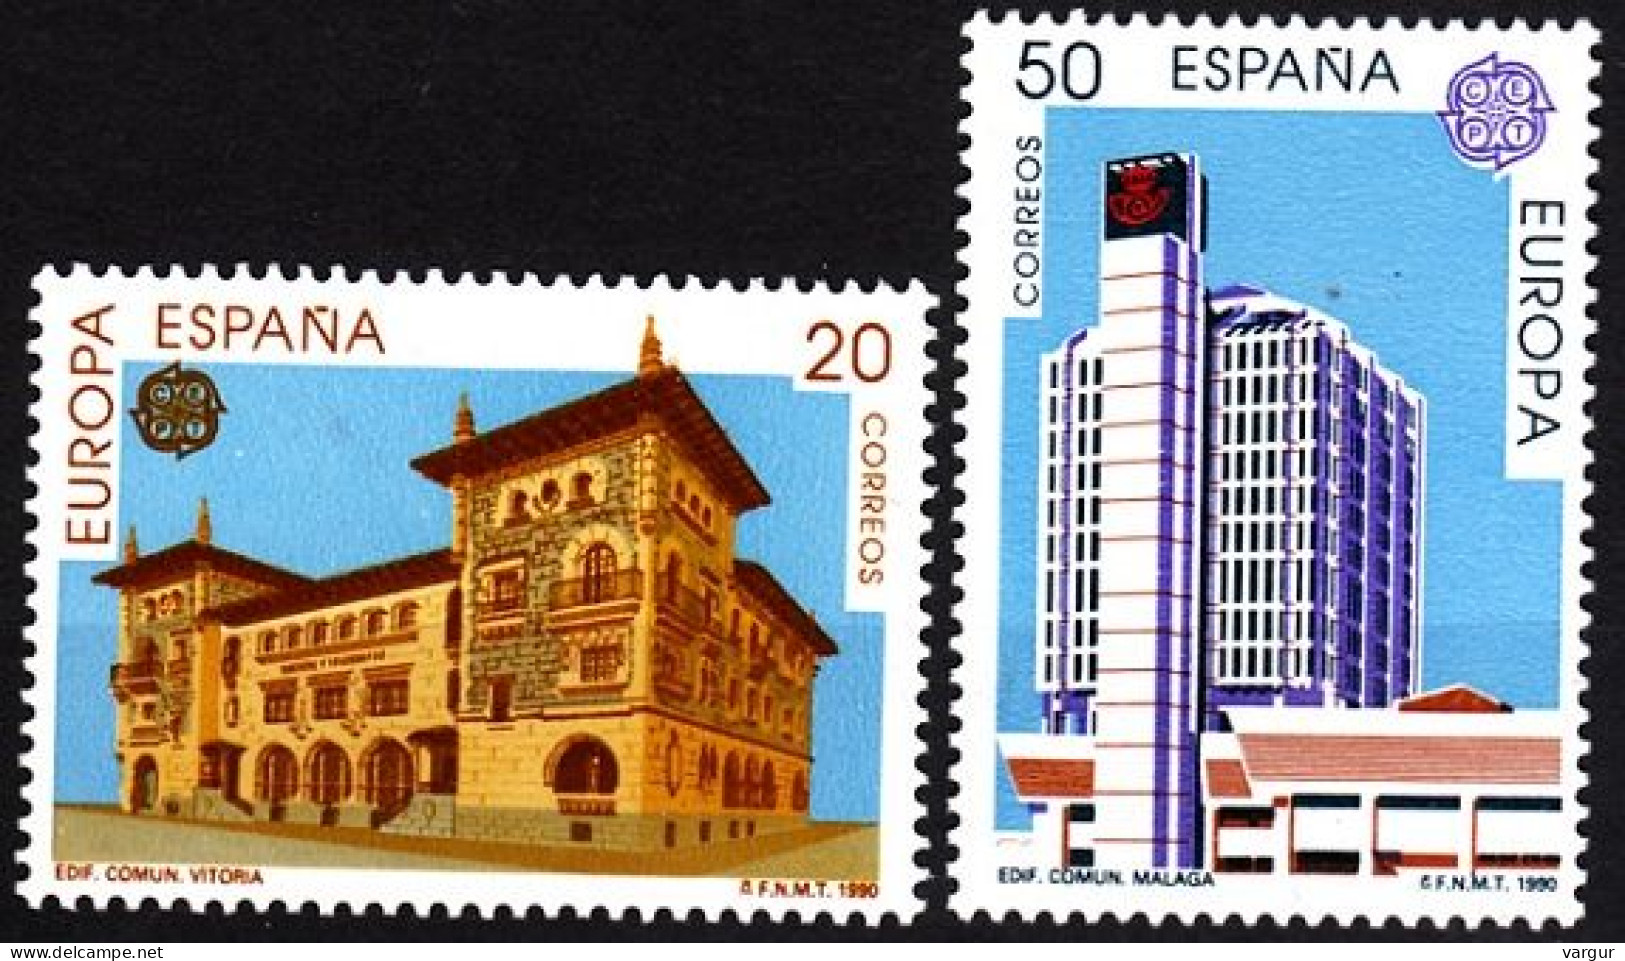 SPAIN 1990 EUROPA: Post Offices, Architecture. Complete Set, MNH - 1990